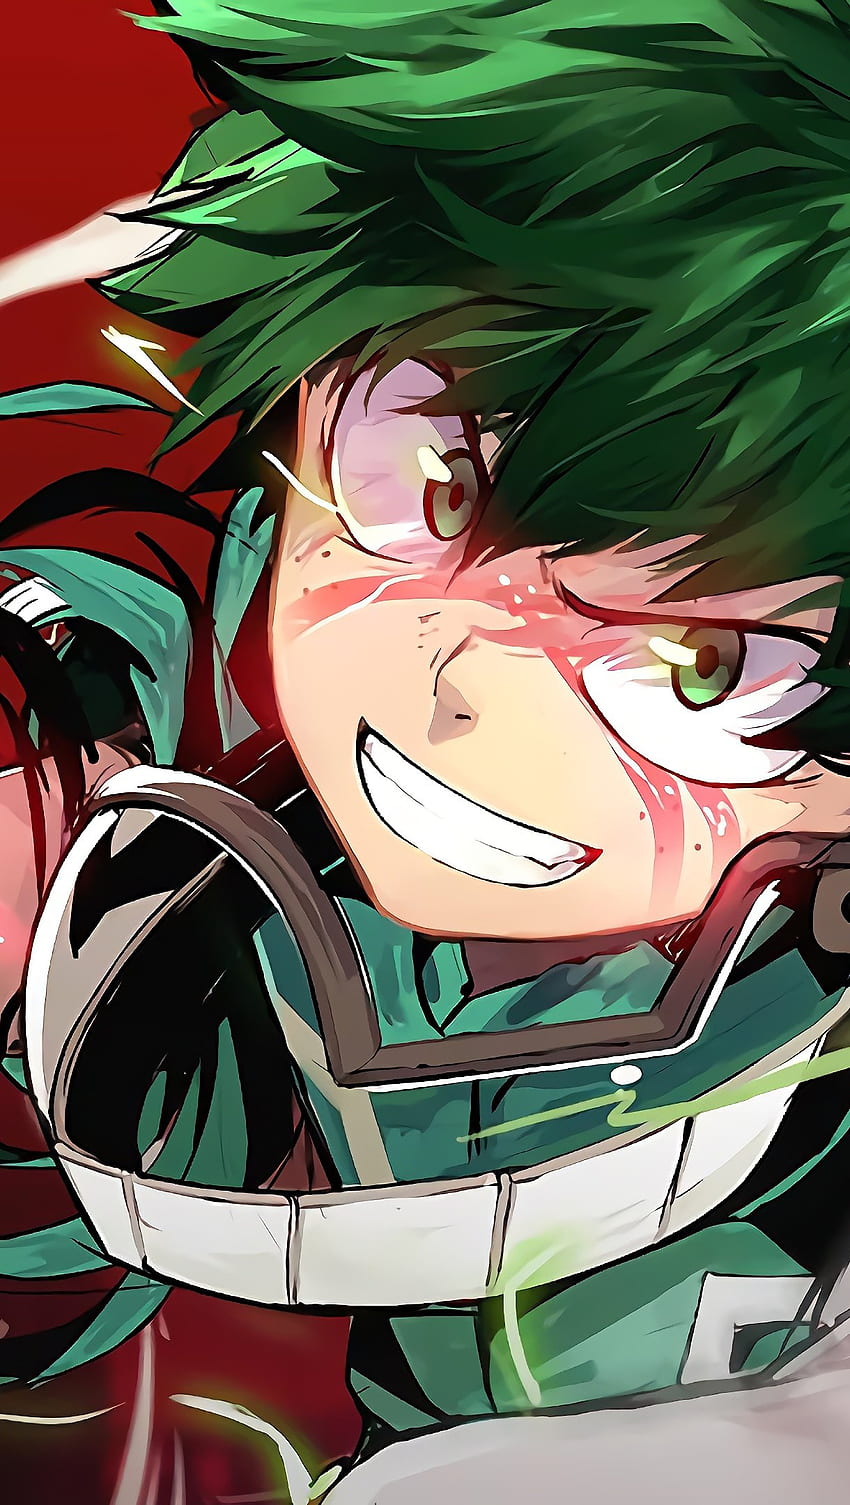 deanna zakhary recommends Show Me A Picture Of Deku From My Hero Academia